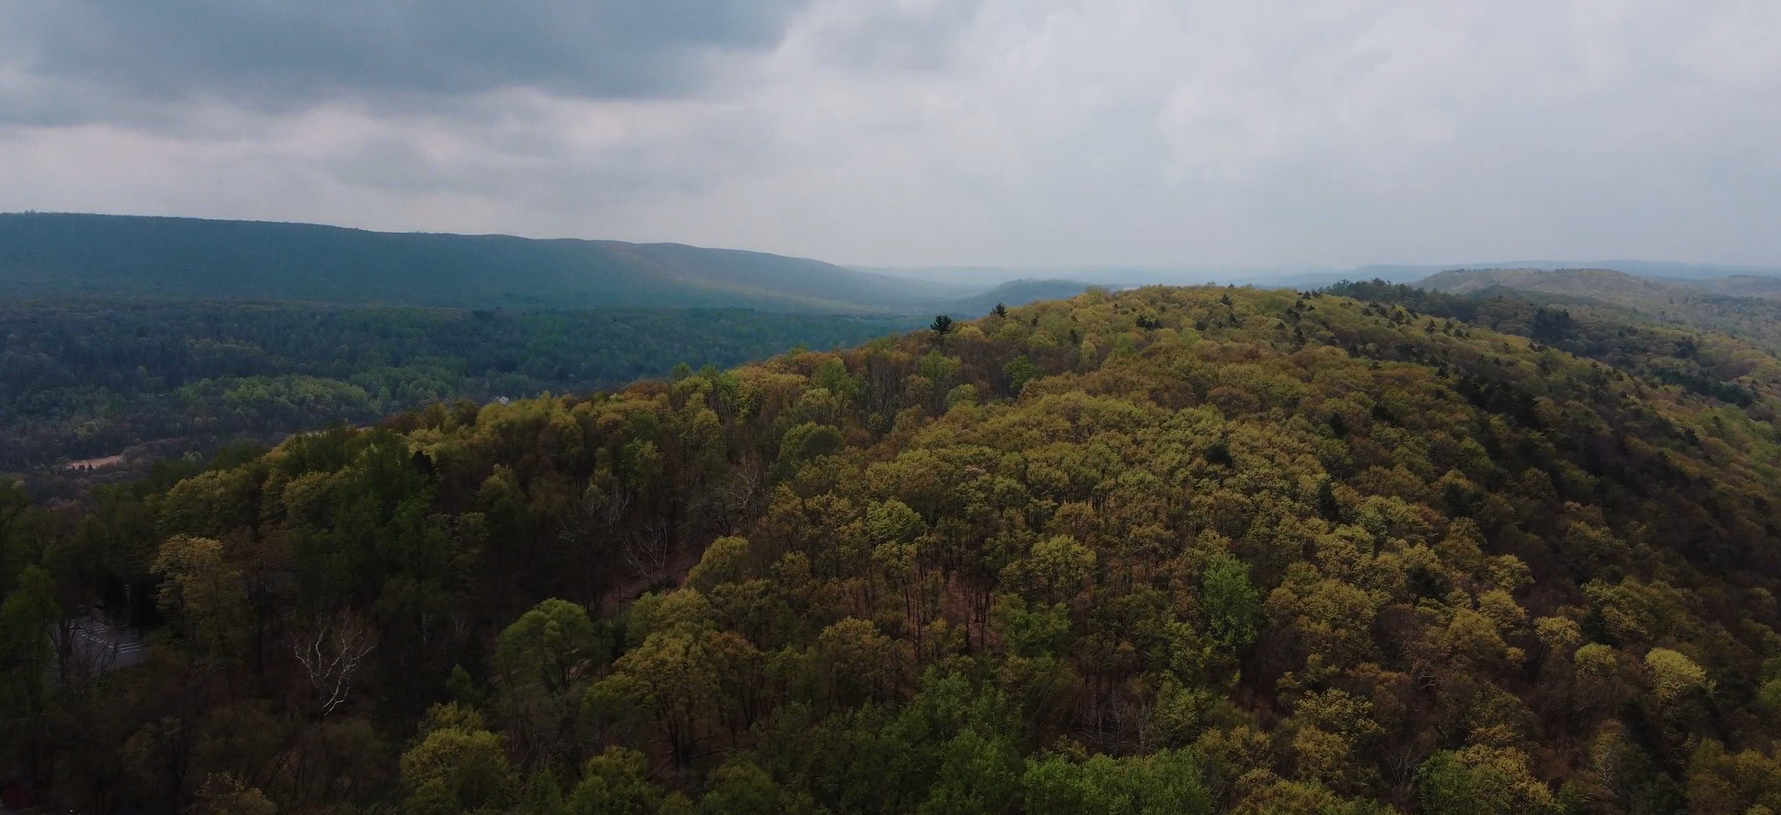 Drone overview of the Pocono Mountains during the day by Ever After Studio